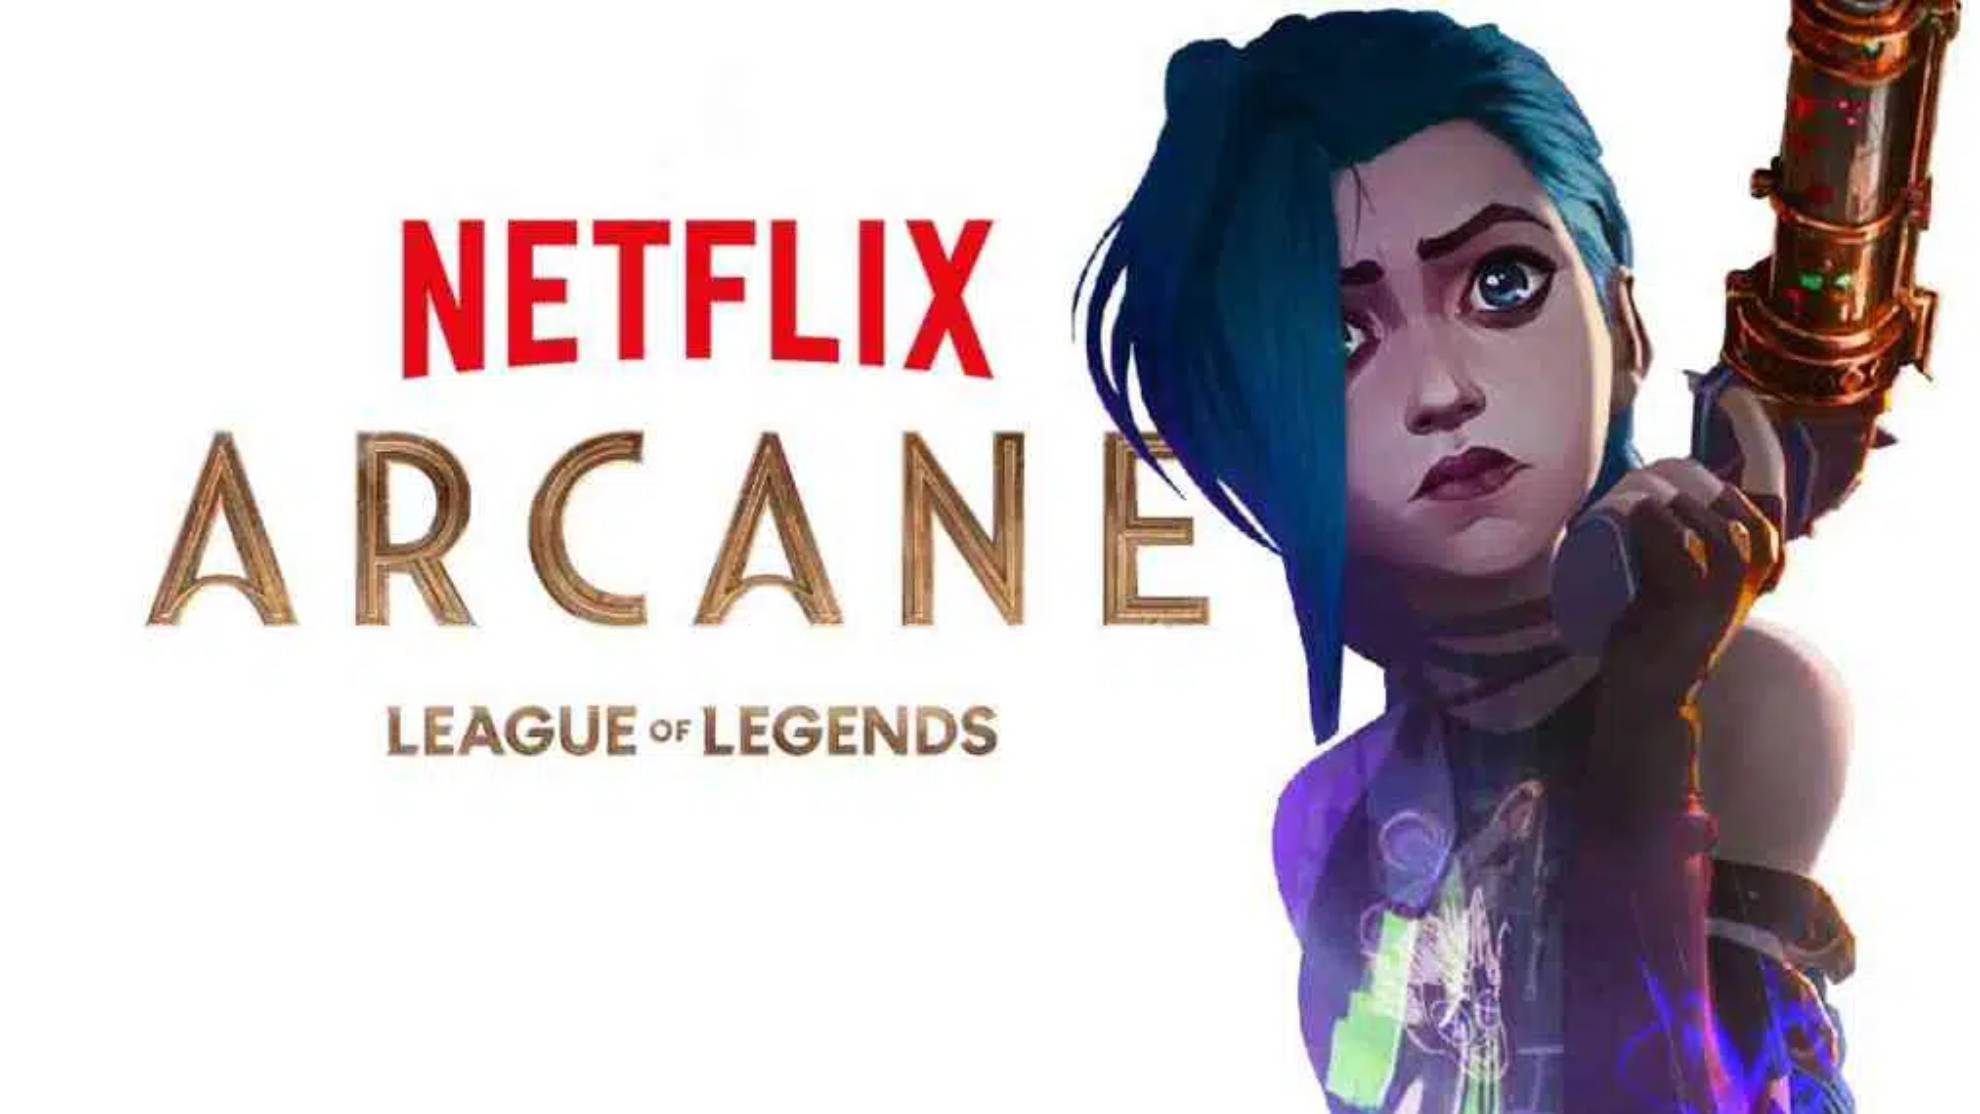 Arcane Season Two Is a Go with Netflix and Riot Games